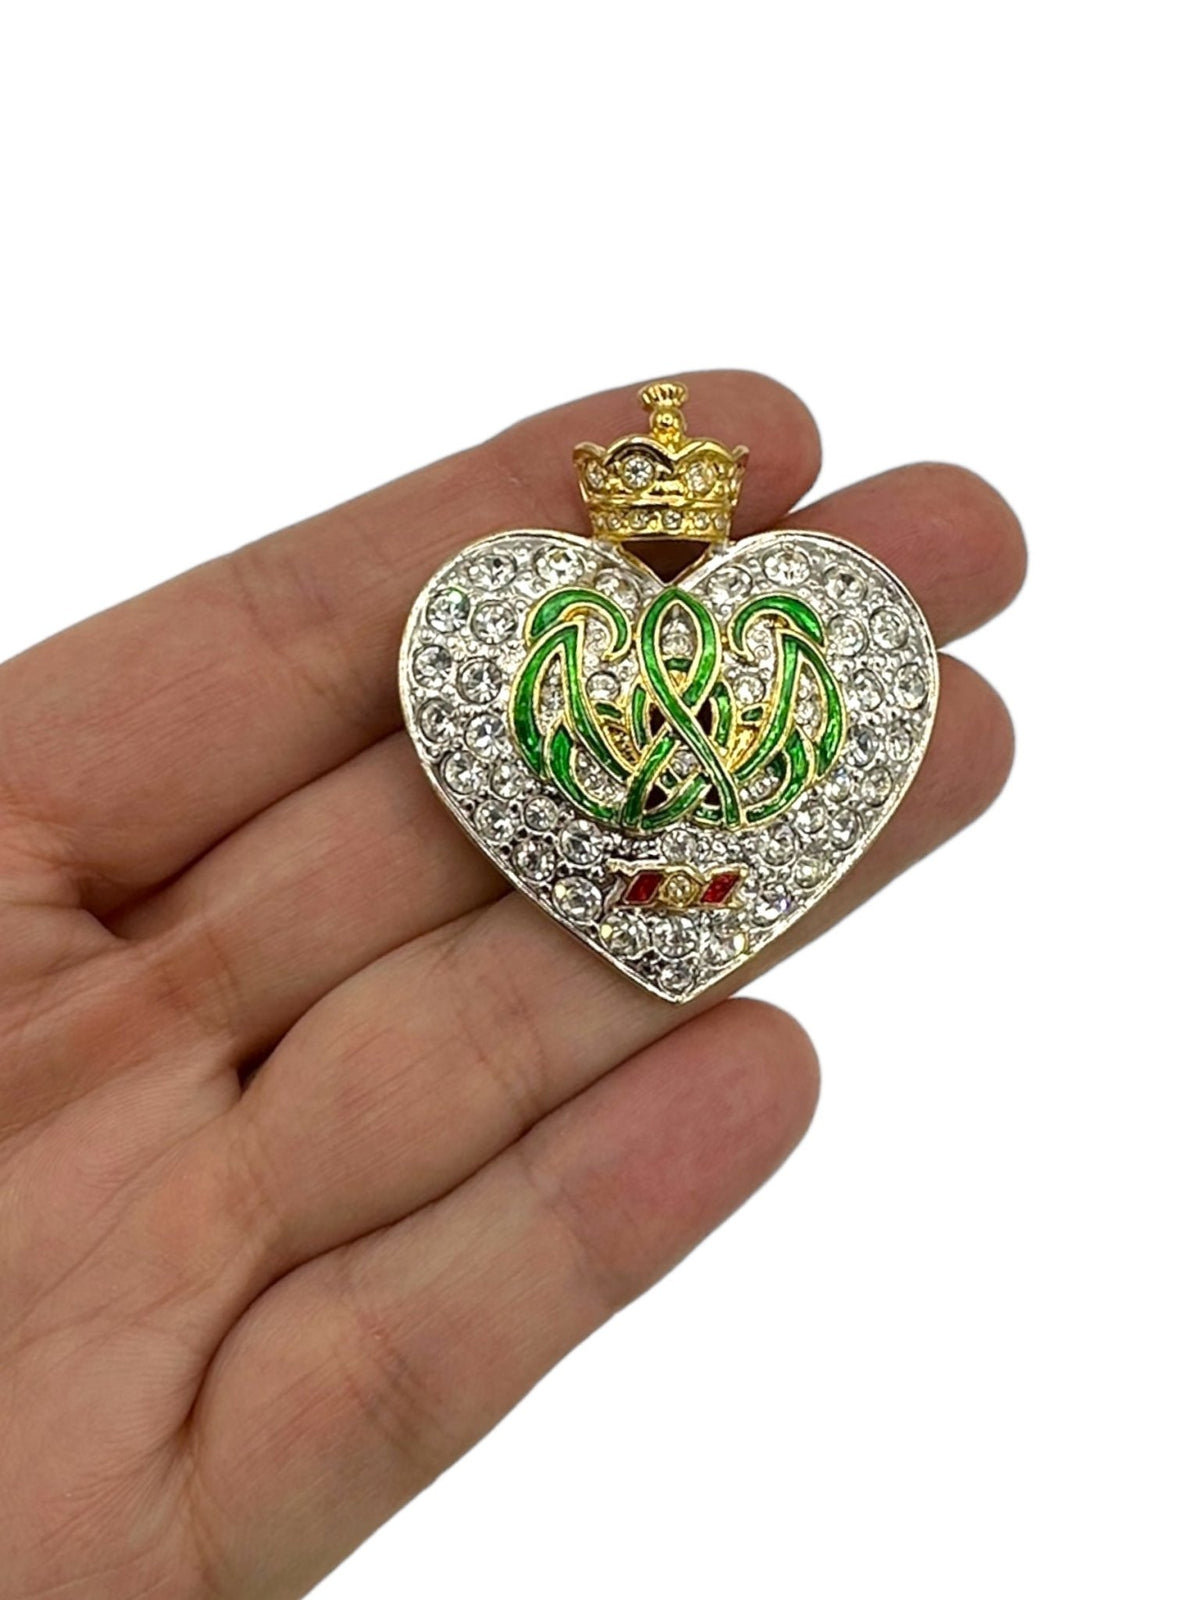 Kenneth Jay Lane Treasures of the Duchess Rhinestone Heart Brooch - 24 Wishes Vintage Jewelry